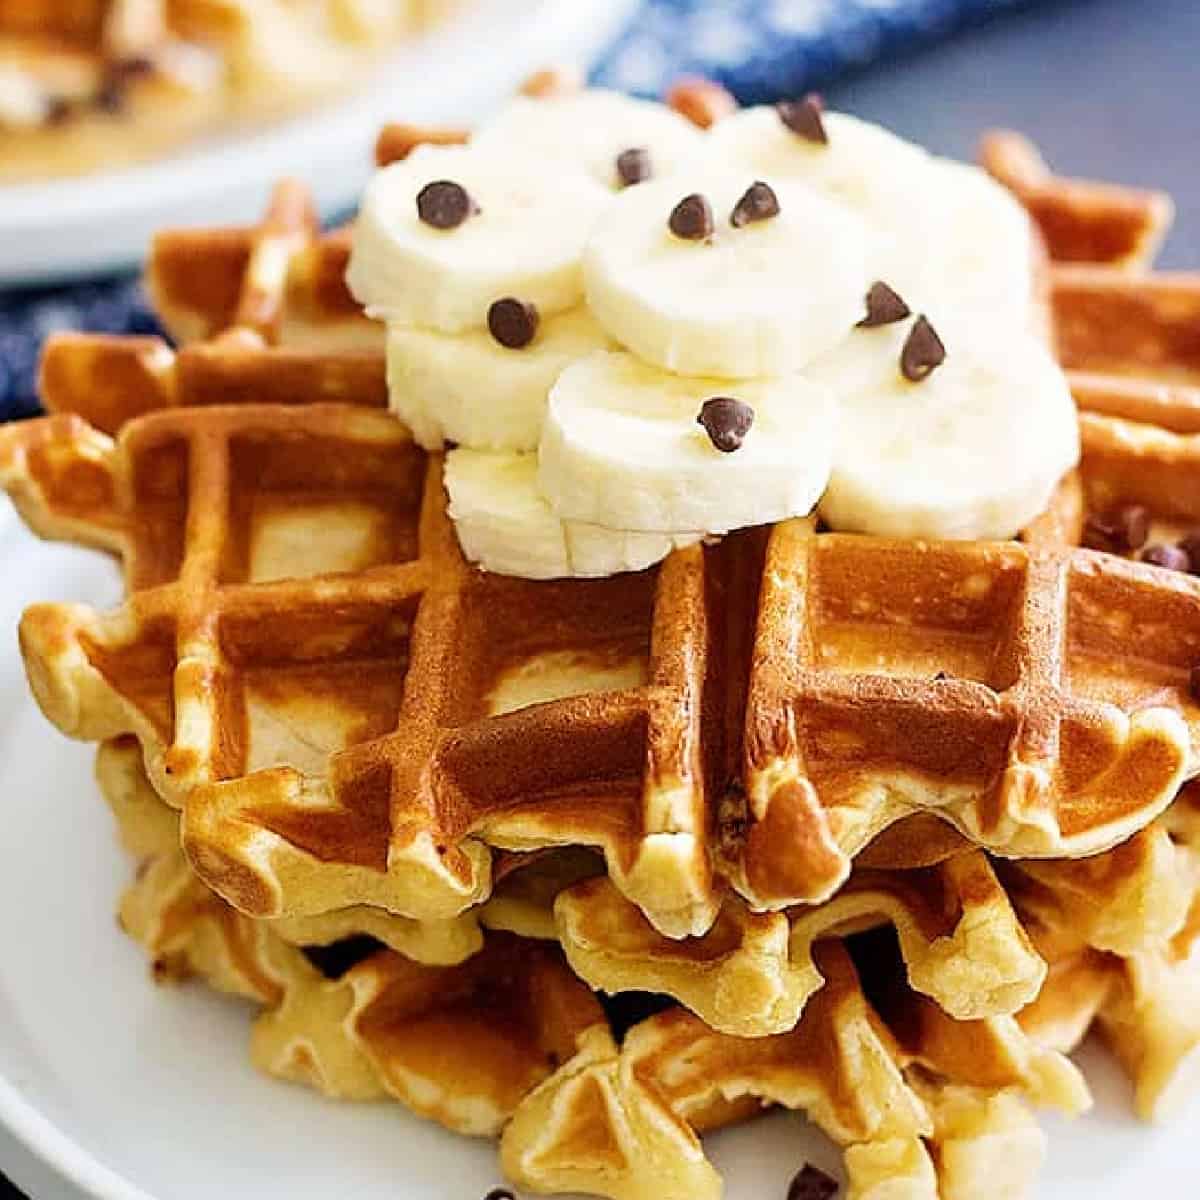 Peanut Butter Chocolate Chip Banana Waffles are great for breakfast or brunch. You can make the batter in a blender in no time and enjoy!
